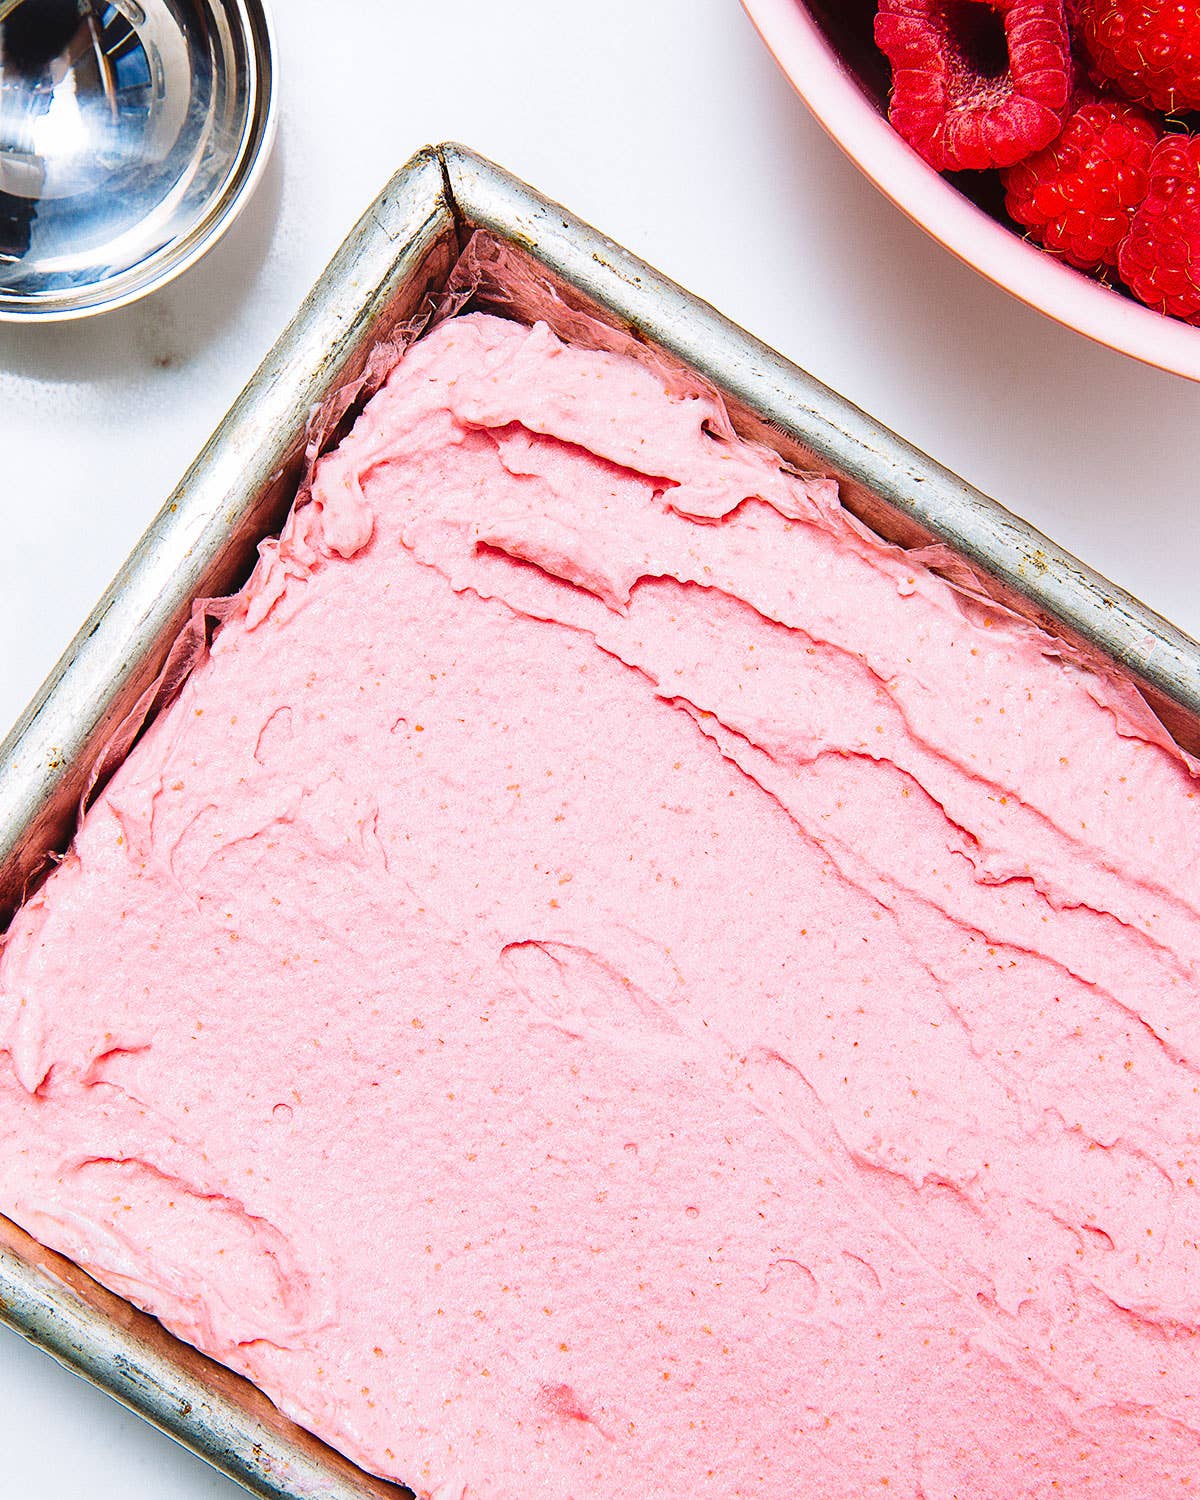 Our All-Time Favorite Raspberry Recipes